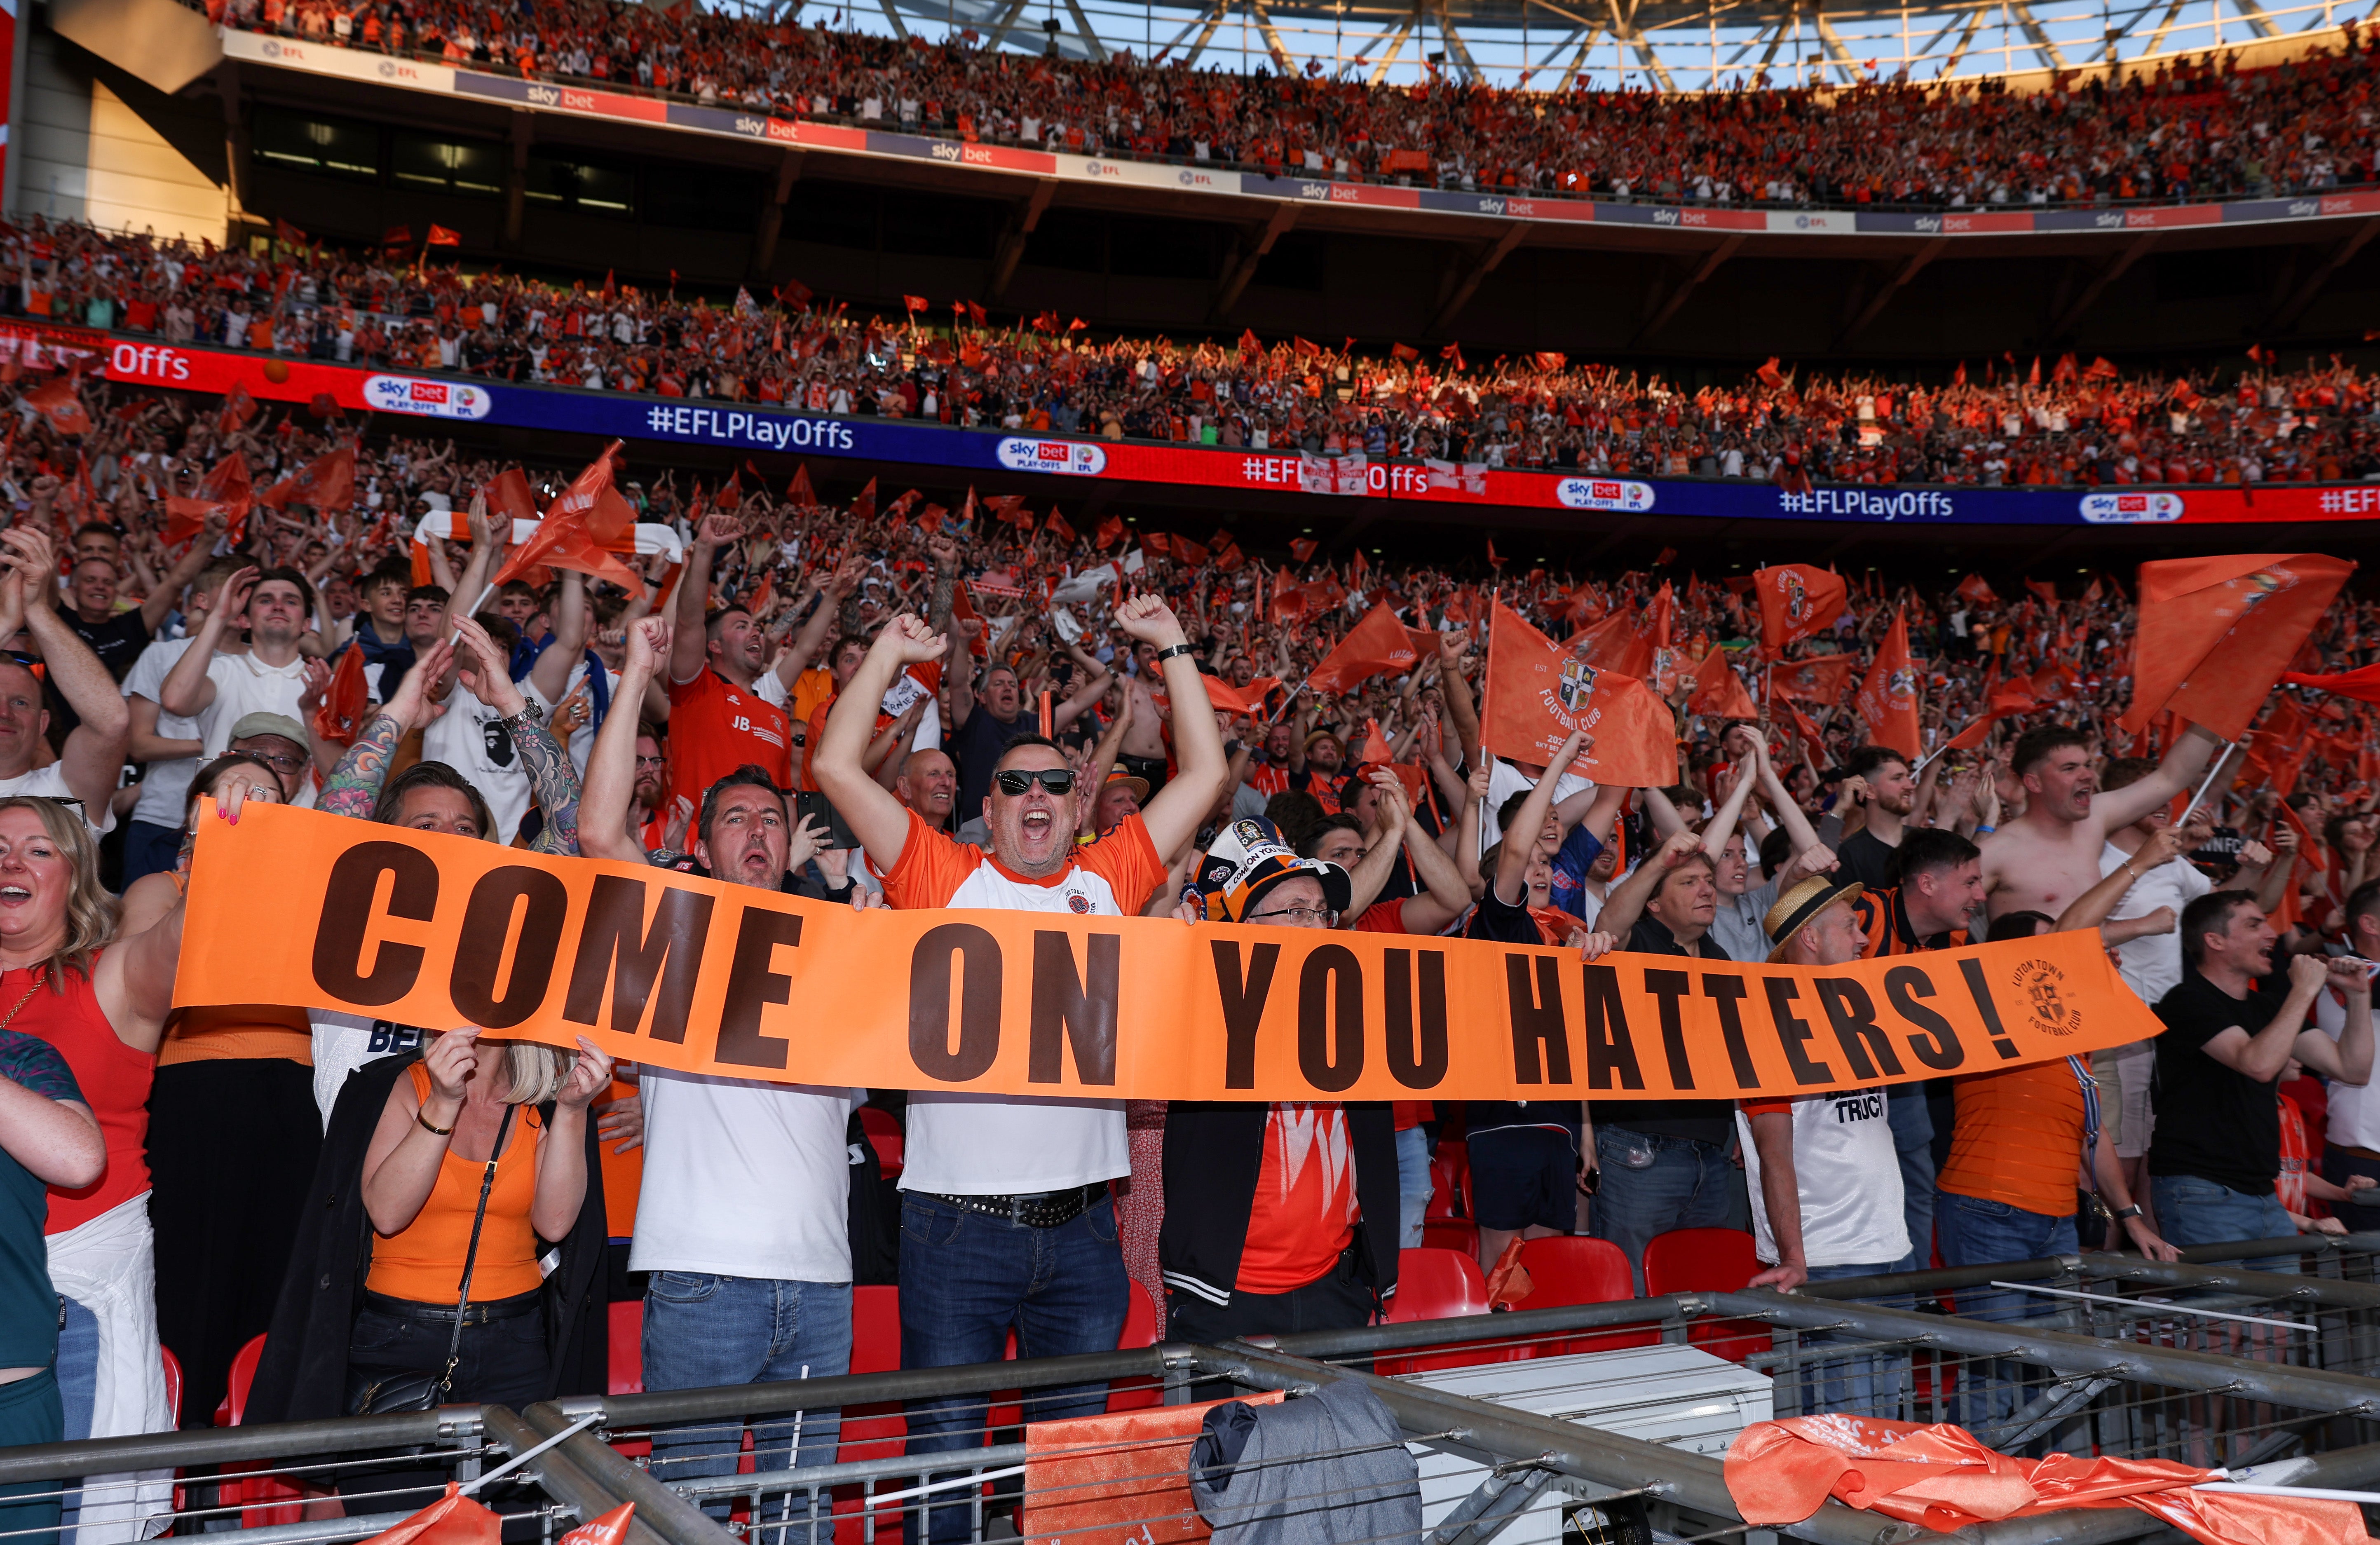 Luton Town will bring a new dimension to the Premier League